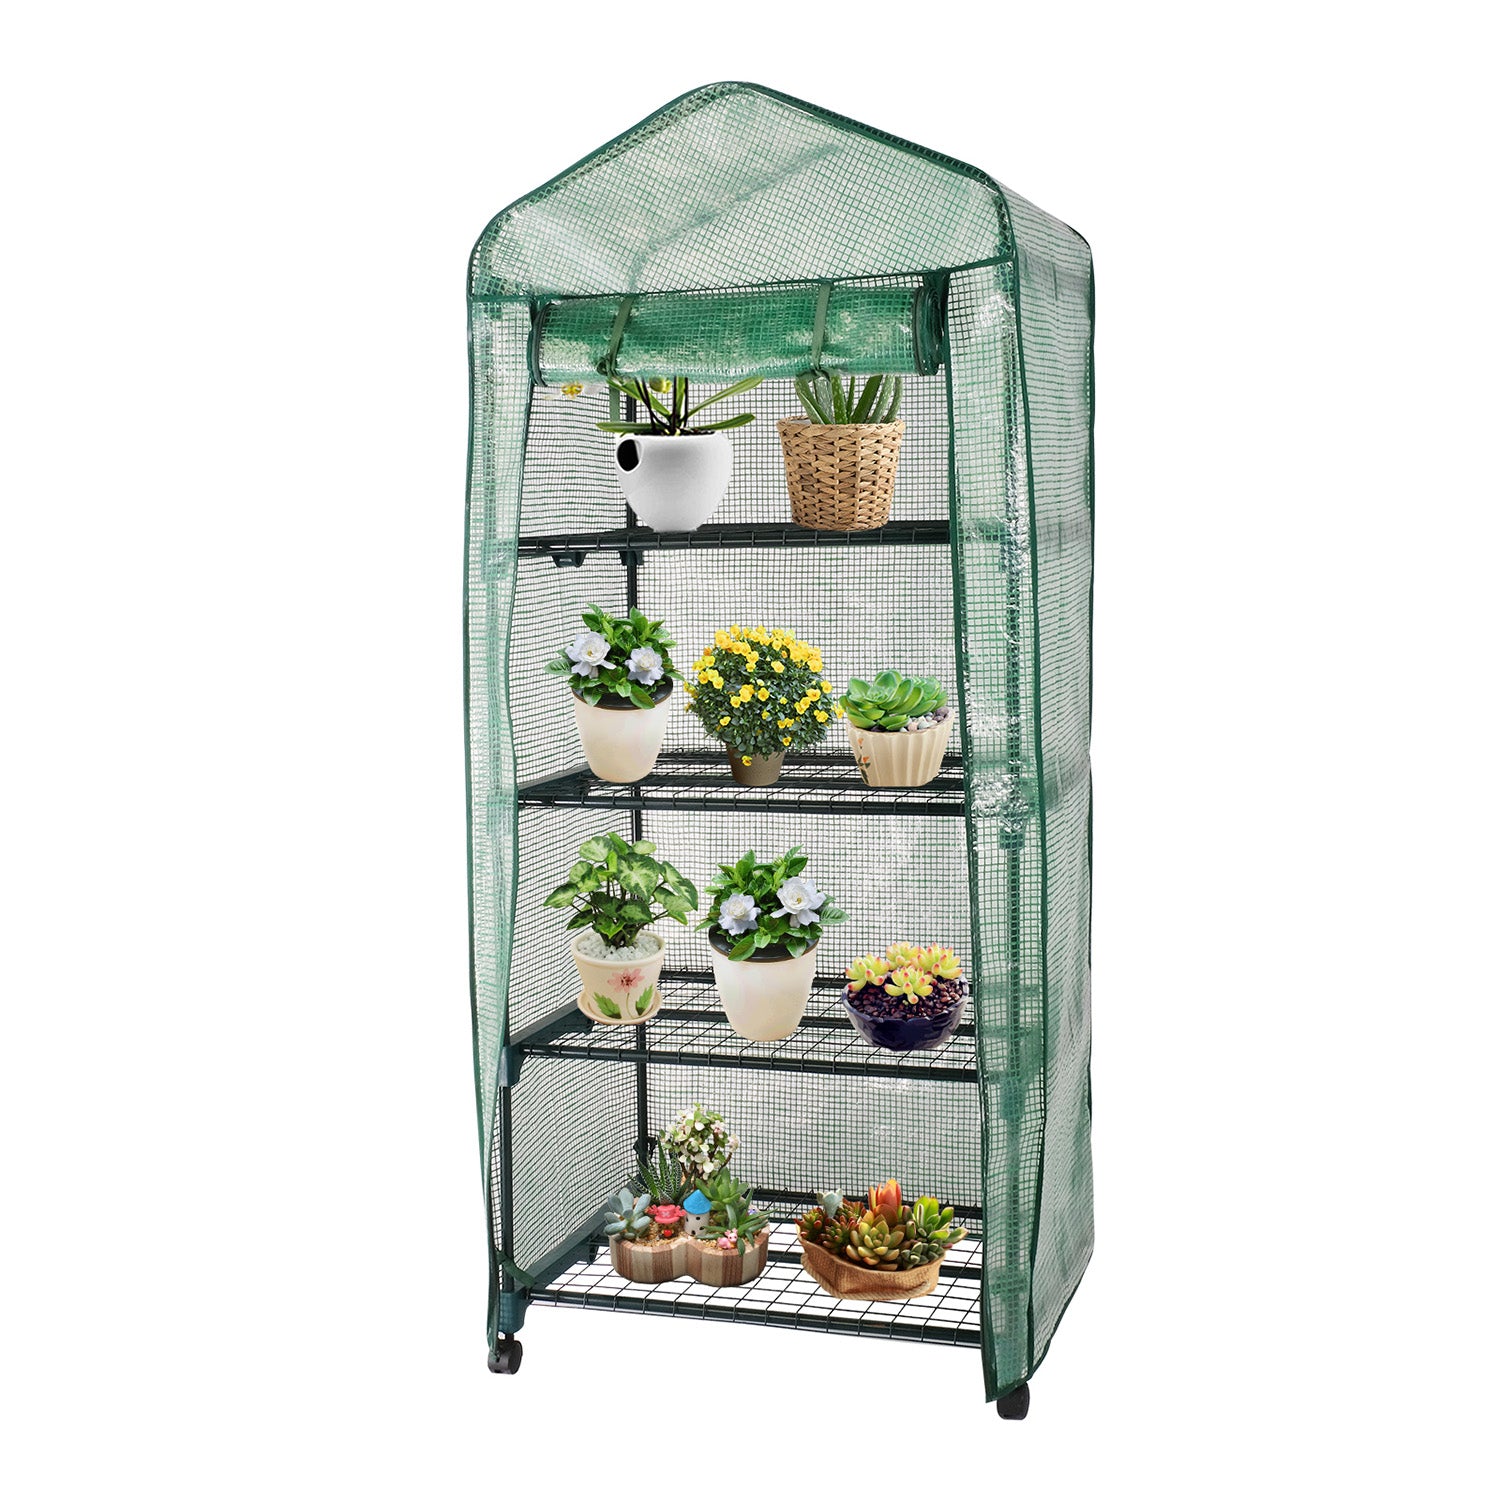 4 Tiers Mini Greenhouse with Caster Wheels Portable Outdoor Planter House